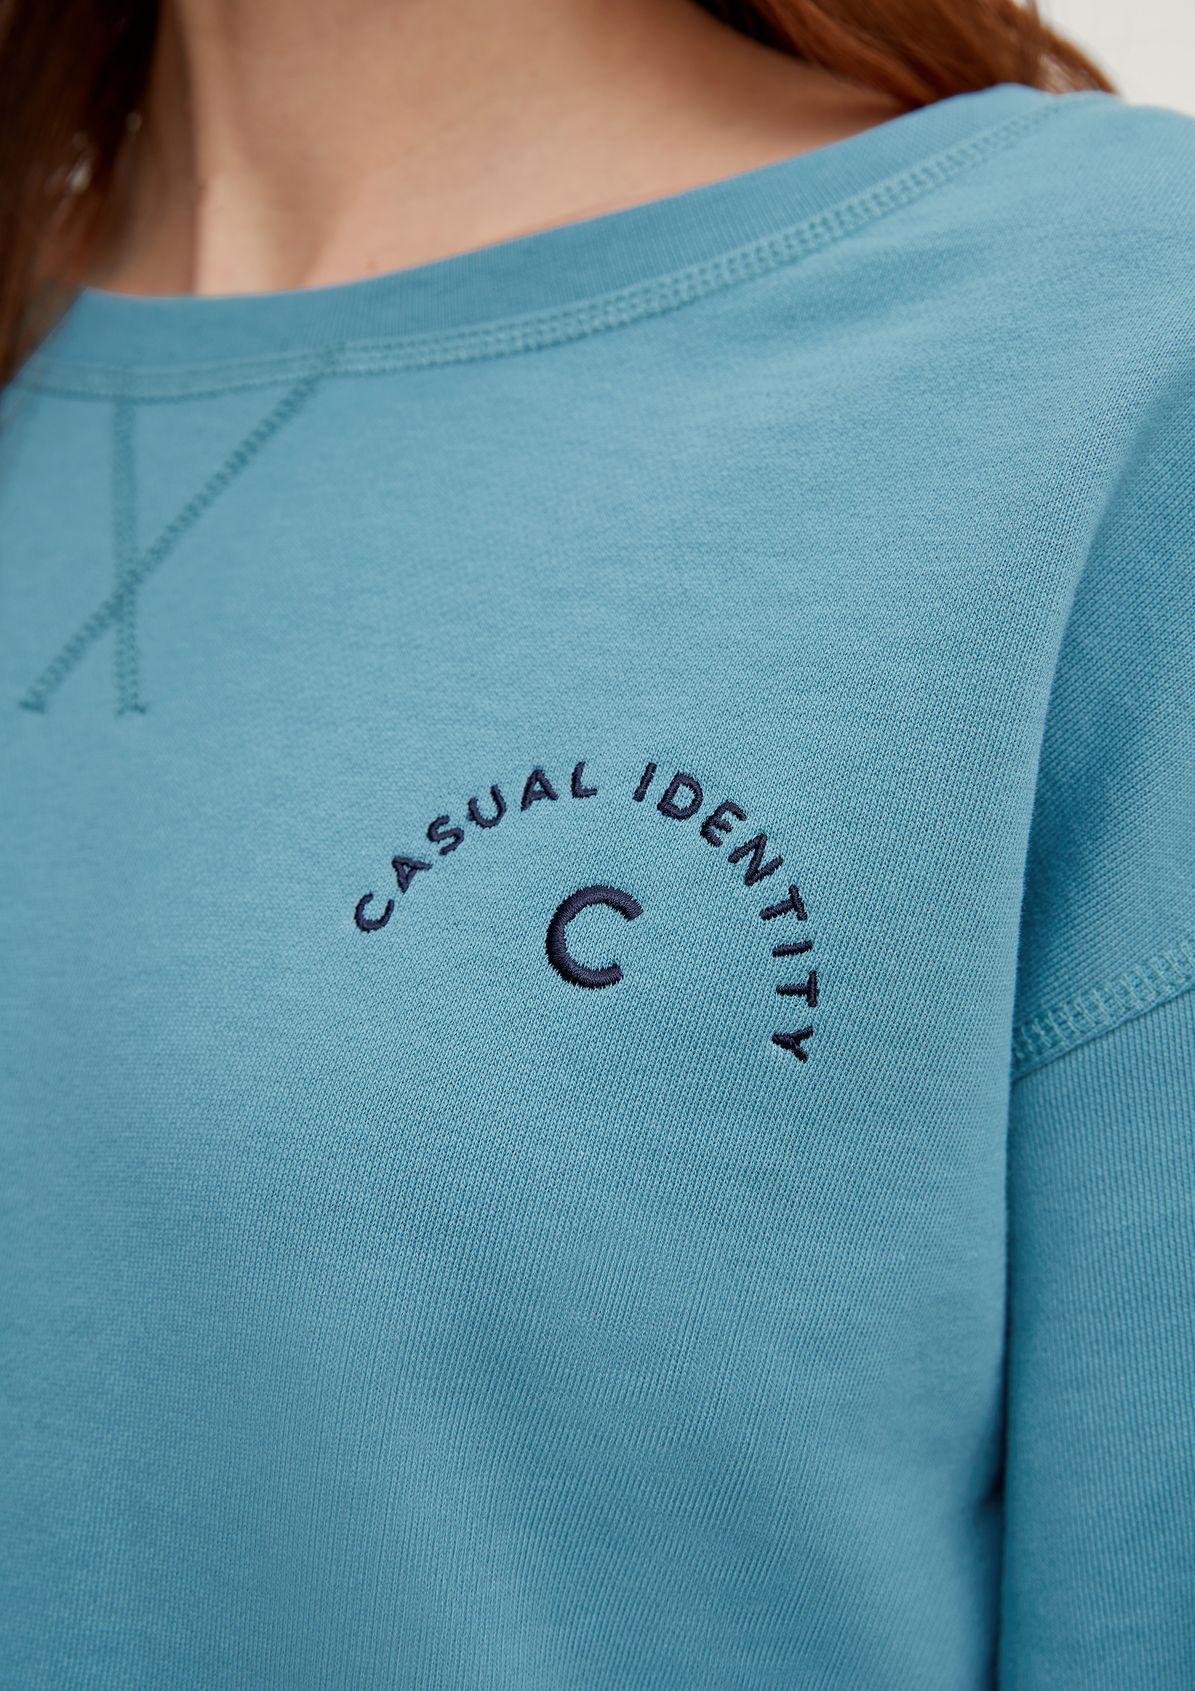 Cropped sweatshirt from comma